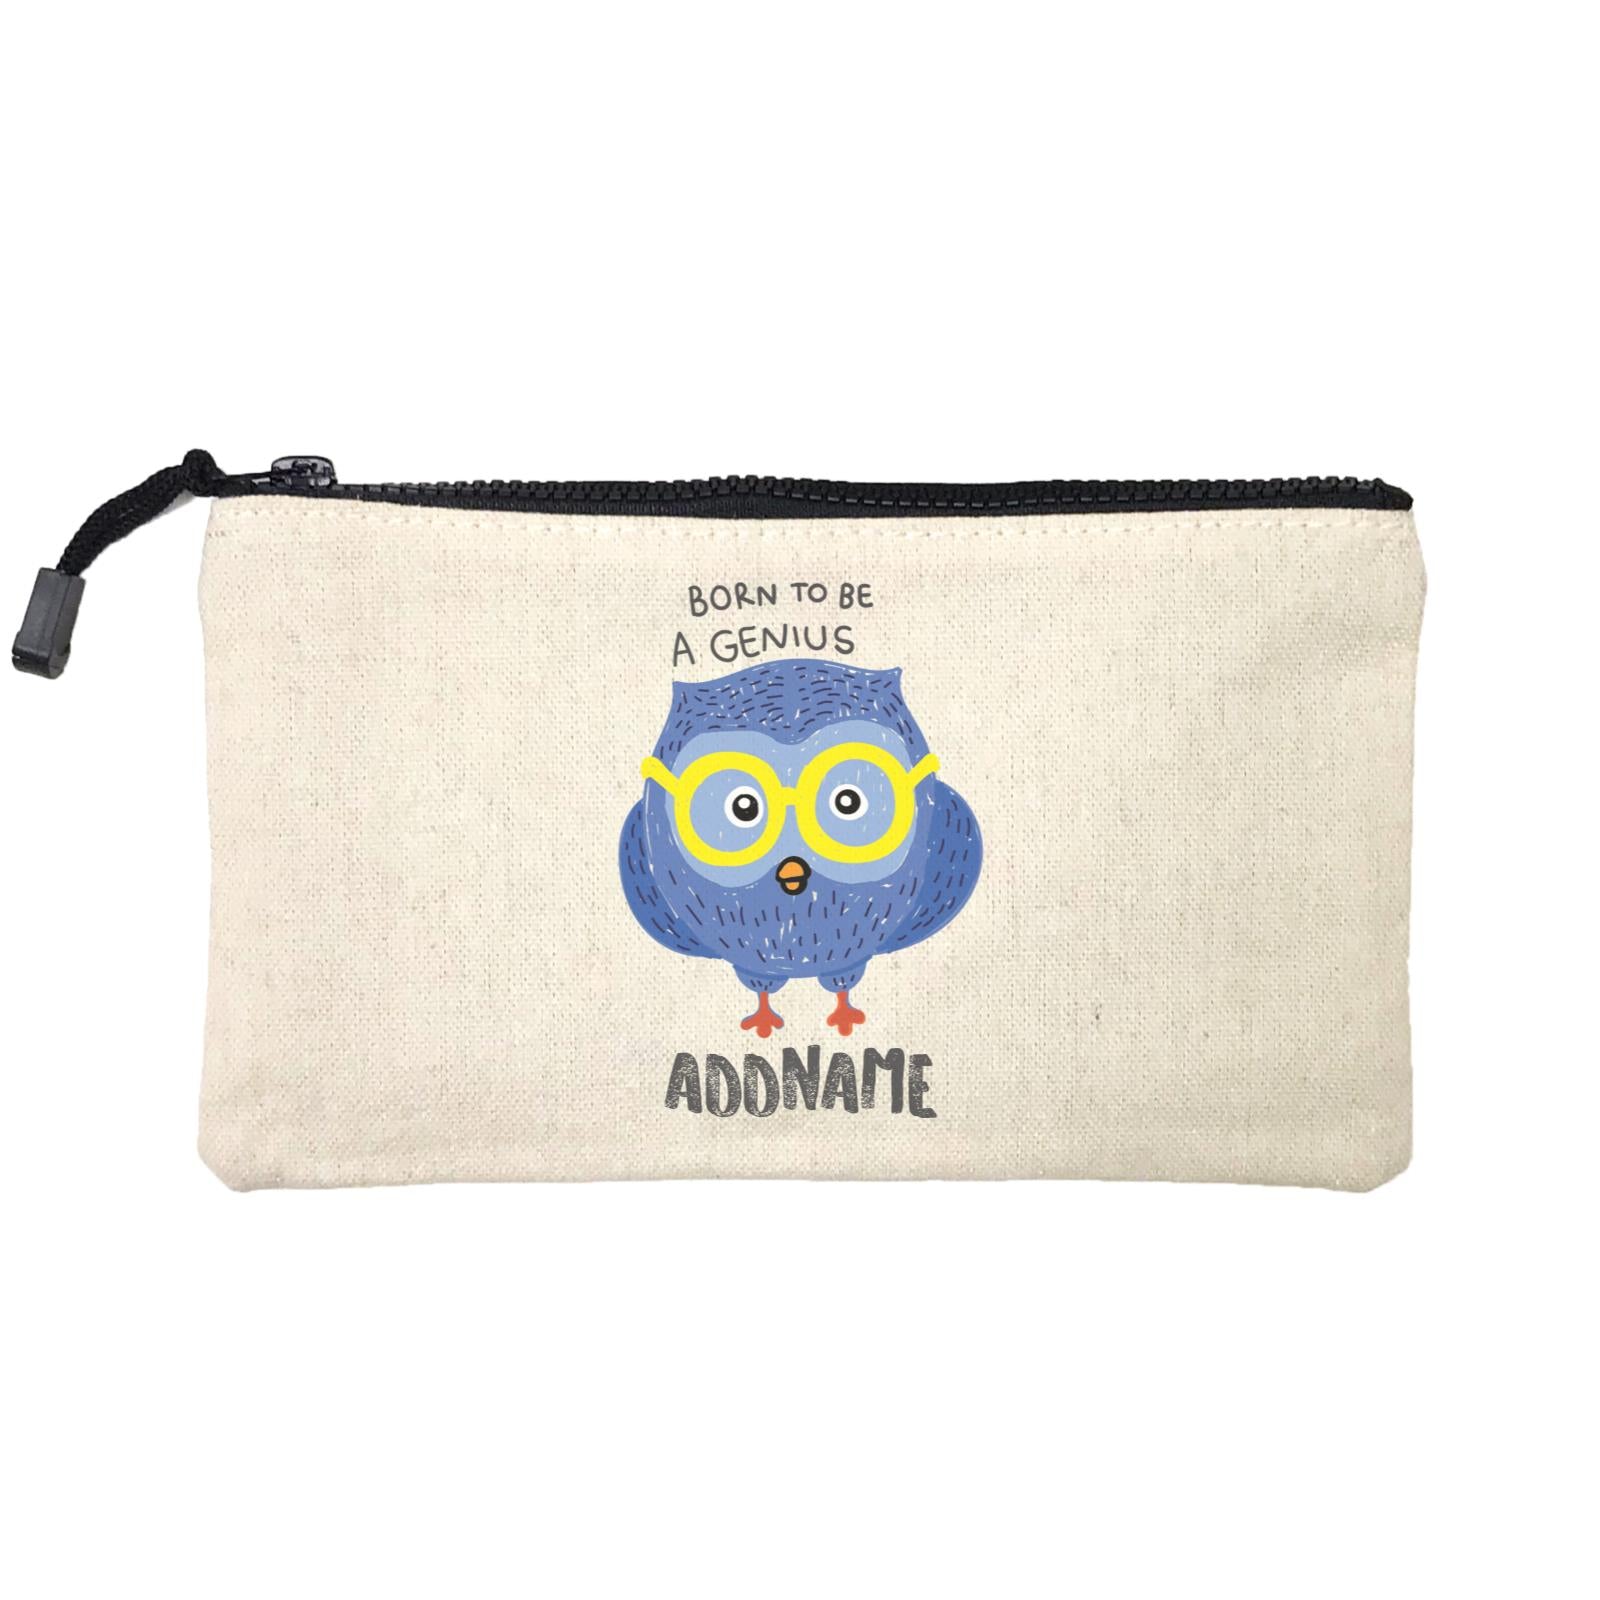 Cool Cute Animals Owl Born To Be A Genius Addname Mini Accessories Stationery Pouch